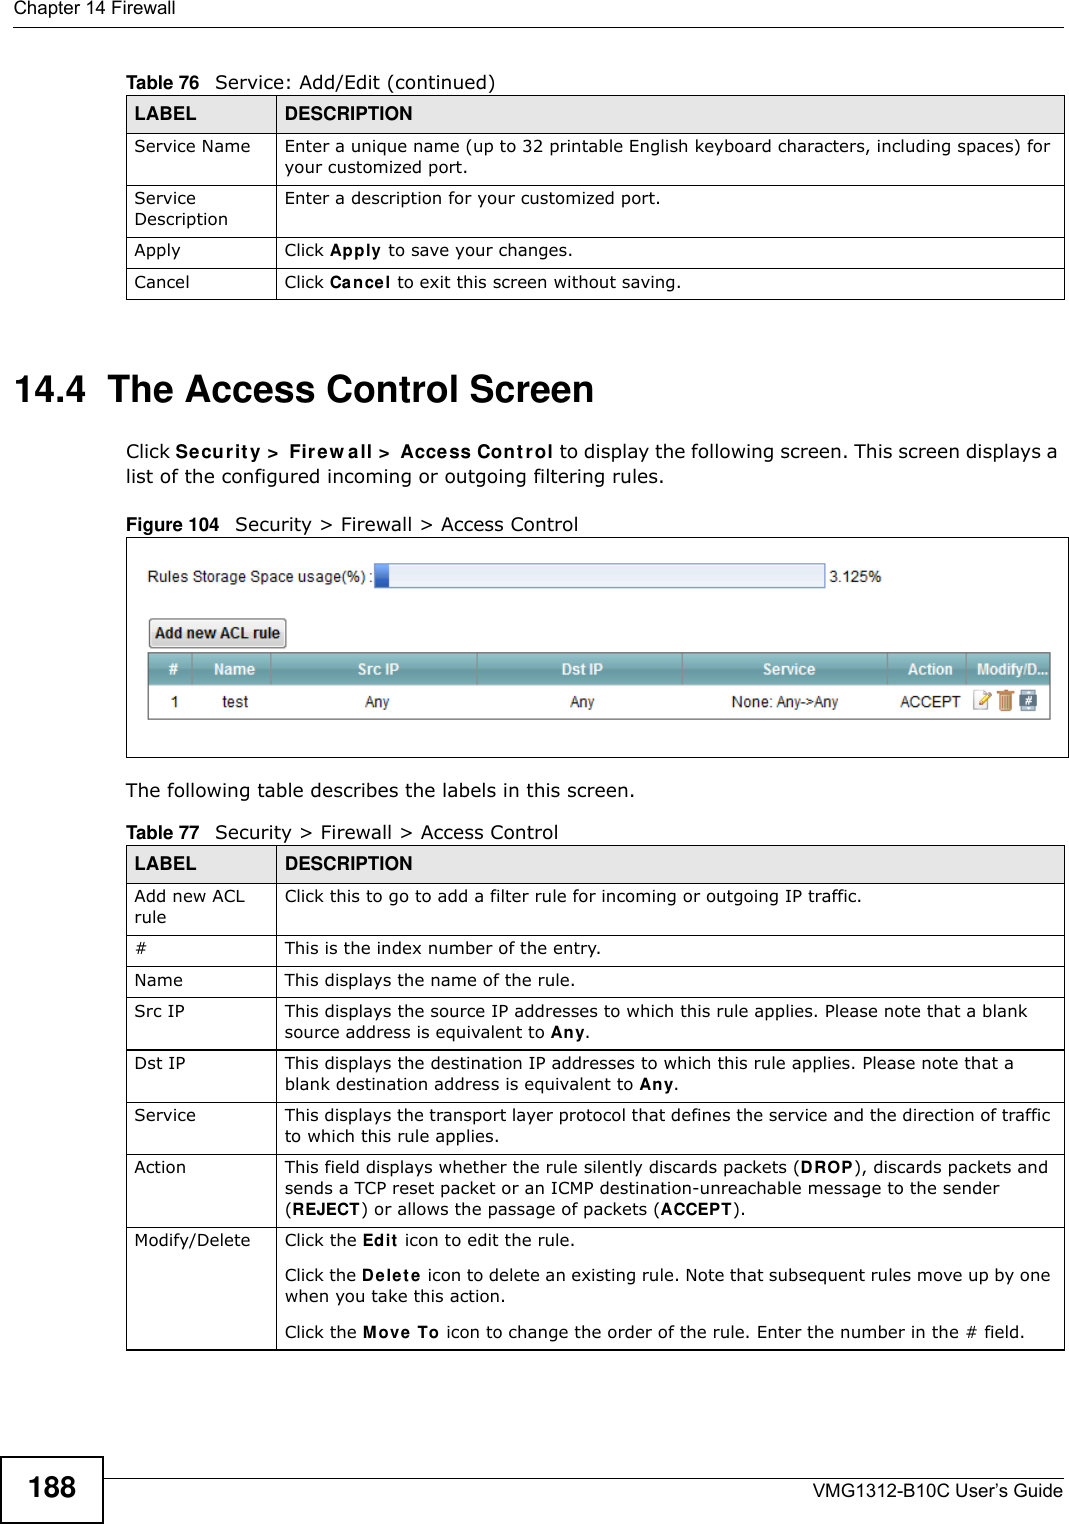 Chapter 14 FirewallVMG1312-B10C User’s Guide18814.4  The Access Control ScreenClick Secur it y &gt;  Fir e w all &gt;  Acce ss Con t r ol to display the following screen. This screen displays a list of the configured incoming or outgoing filtering rules. Figure 104   Security &gt; Firewall &gt; Access Control The following table describes the labels in this screen. Service Name Enter a unique name (up to 32 printable English keyboard characters, including spaces) for your customized port. Service DescriptionEnter a description for your customized port.Apply Click Apply to save your changes.Cancel Click Cancel to exit this screen without saving.Table 76   Service: Add/Edit (continued)LABEL DESCRIPTIONTable 77   Security &gt; Firewall &gt; Access ControlLABEL DESCRIPTIONAdd new ACL ruleClick this to go to add a filter rule for incoming or outgoing IP traffic.#This is the index number of the entry.Name This displays the name of the rule.Src IP  This displays the source IP addresses to which this rule applies. Please note that a blank source address is equivalent to An y.Dst IP This displays the destination IP addresses to which this rule applies. Please note that a blank destination address is equivalent to An y.Service This displays the transport layer protocol that defines the service and the direction of traffic to which this rule applies. Action This field displays whether the rule silently discards packets (DROP), discards packets and sends a TCP reset packet or an ICMP destination-unreachable message to the sender (REJECT) or allows the passage of packets (ACCEPT).Modify/Delete Click the Ed it  icon to edit the rule.Click the D e let e  icon to delete an existing rule. Note that subsequent rules move up by one when you take this action.Click the M ove  To icon to change the order of the rule. Enter the number in the # field.